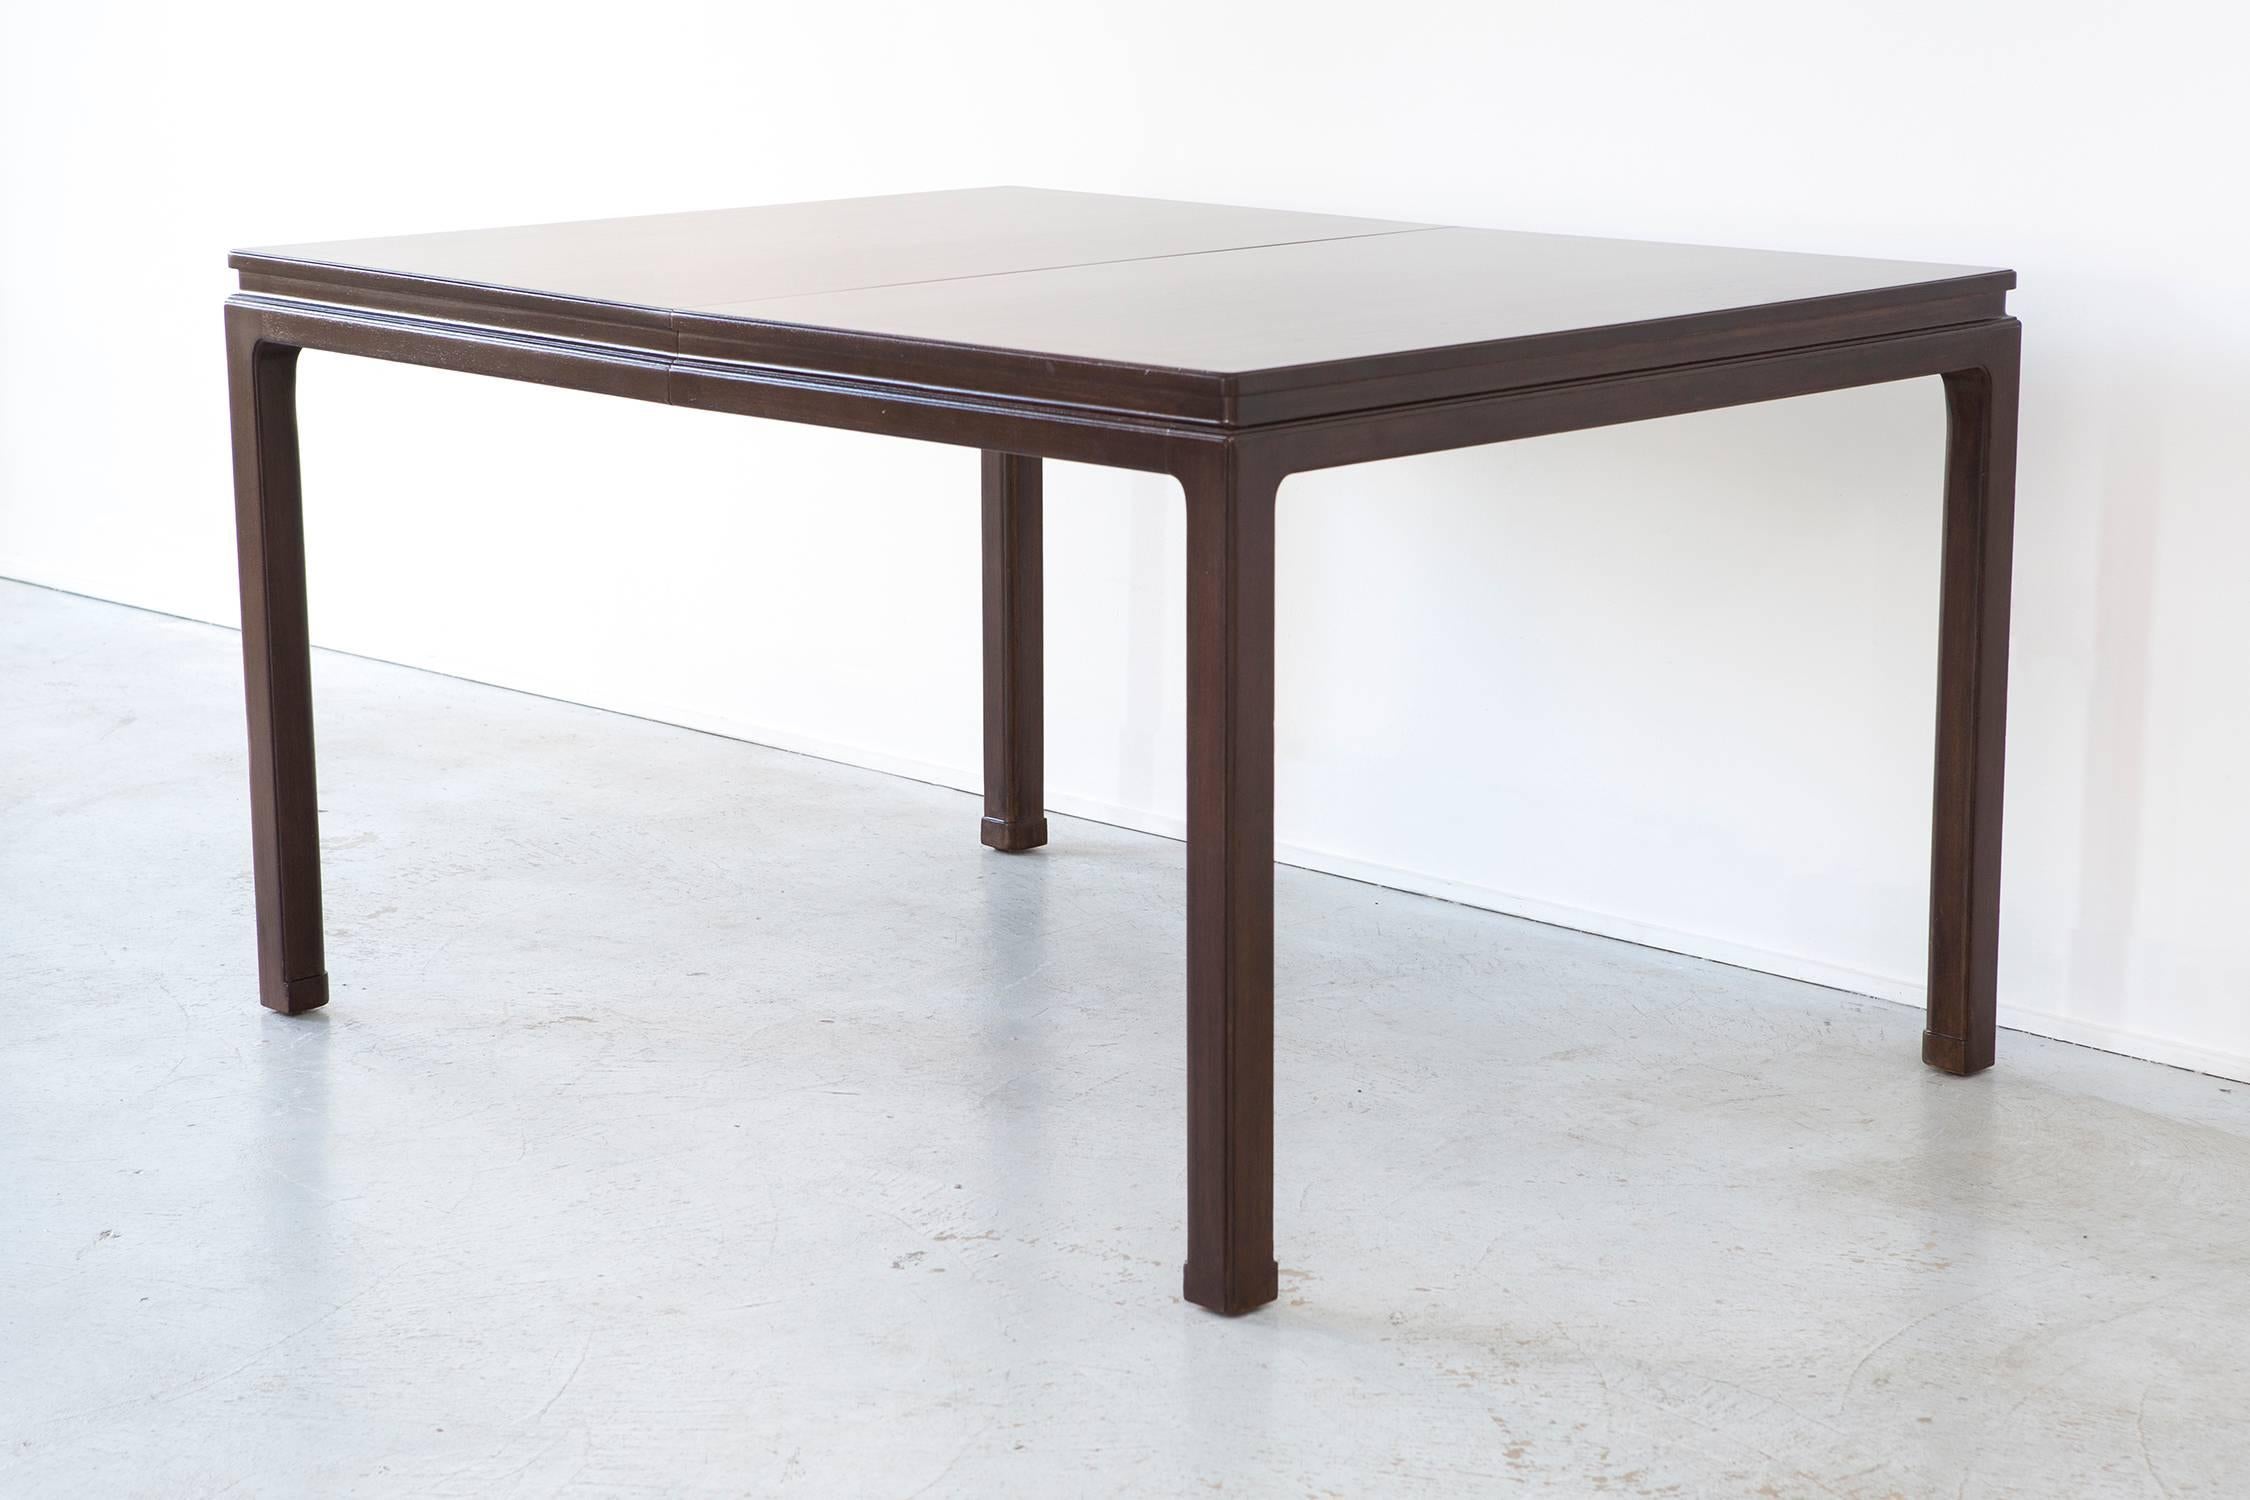 Extending dining table with two leaves

designed by Edward Wormley for Dunbar.

USA, circa 1960s.

Mahogany 

not extended 29 ¼